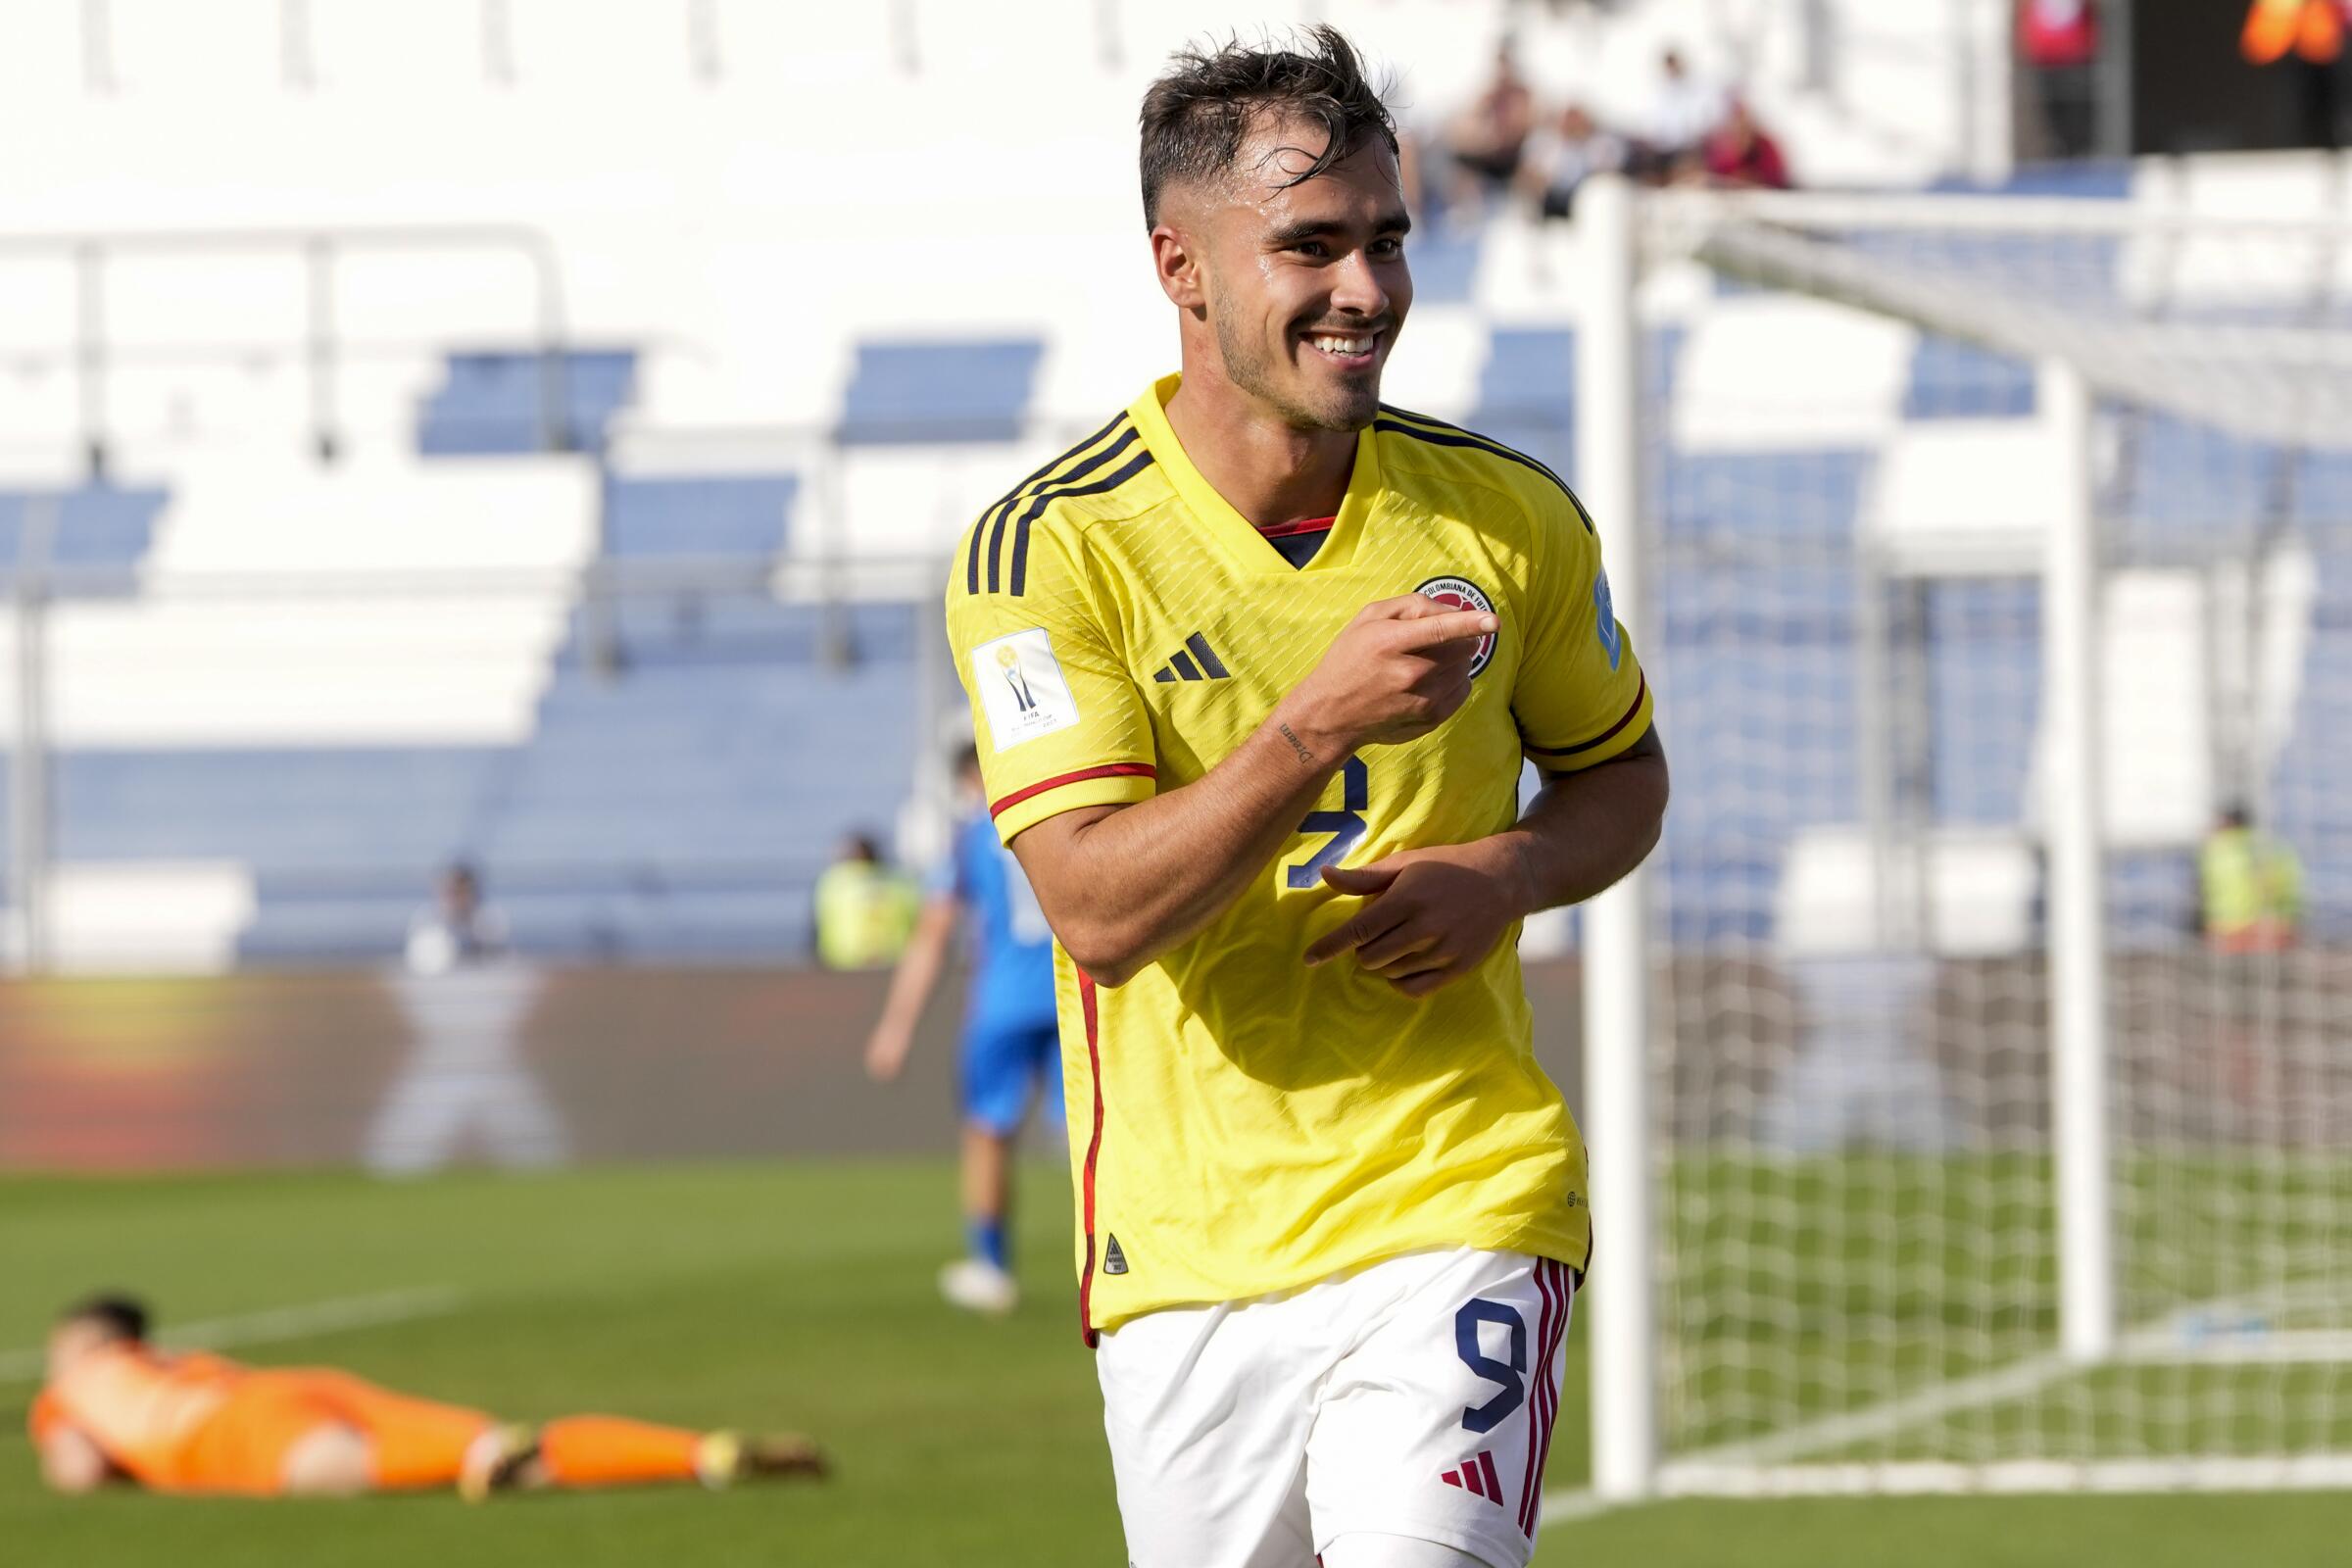 Tomás ?ngel gestures after scoring for Colombia during a FIFA U-20 World Cup game against Slovakia.